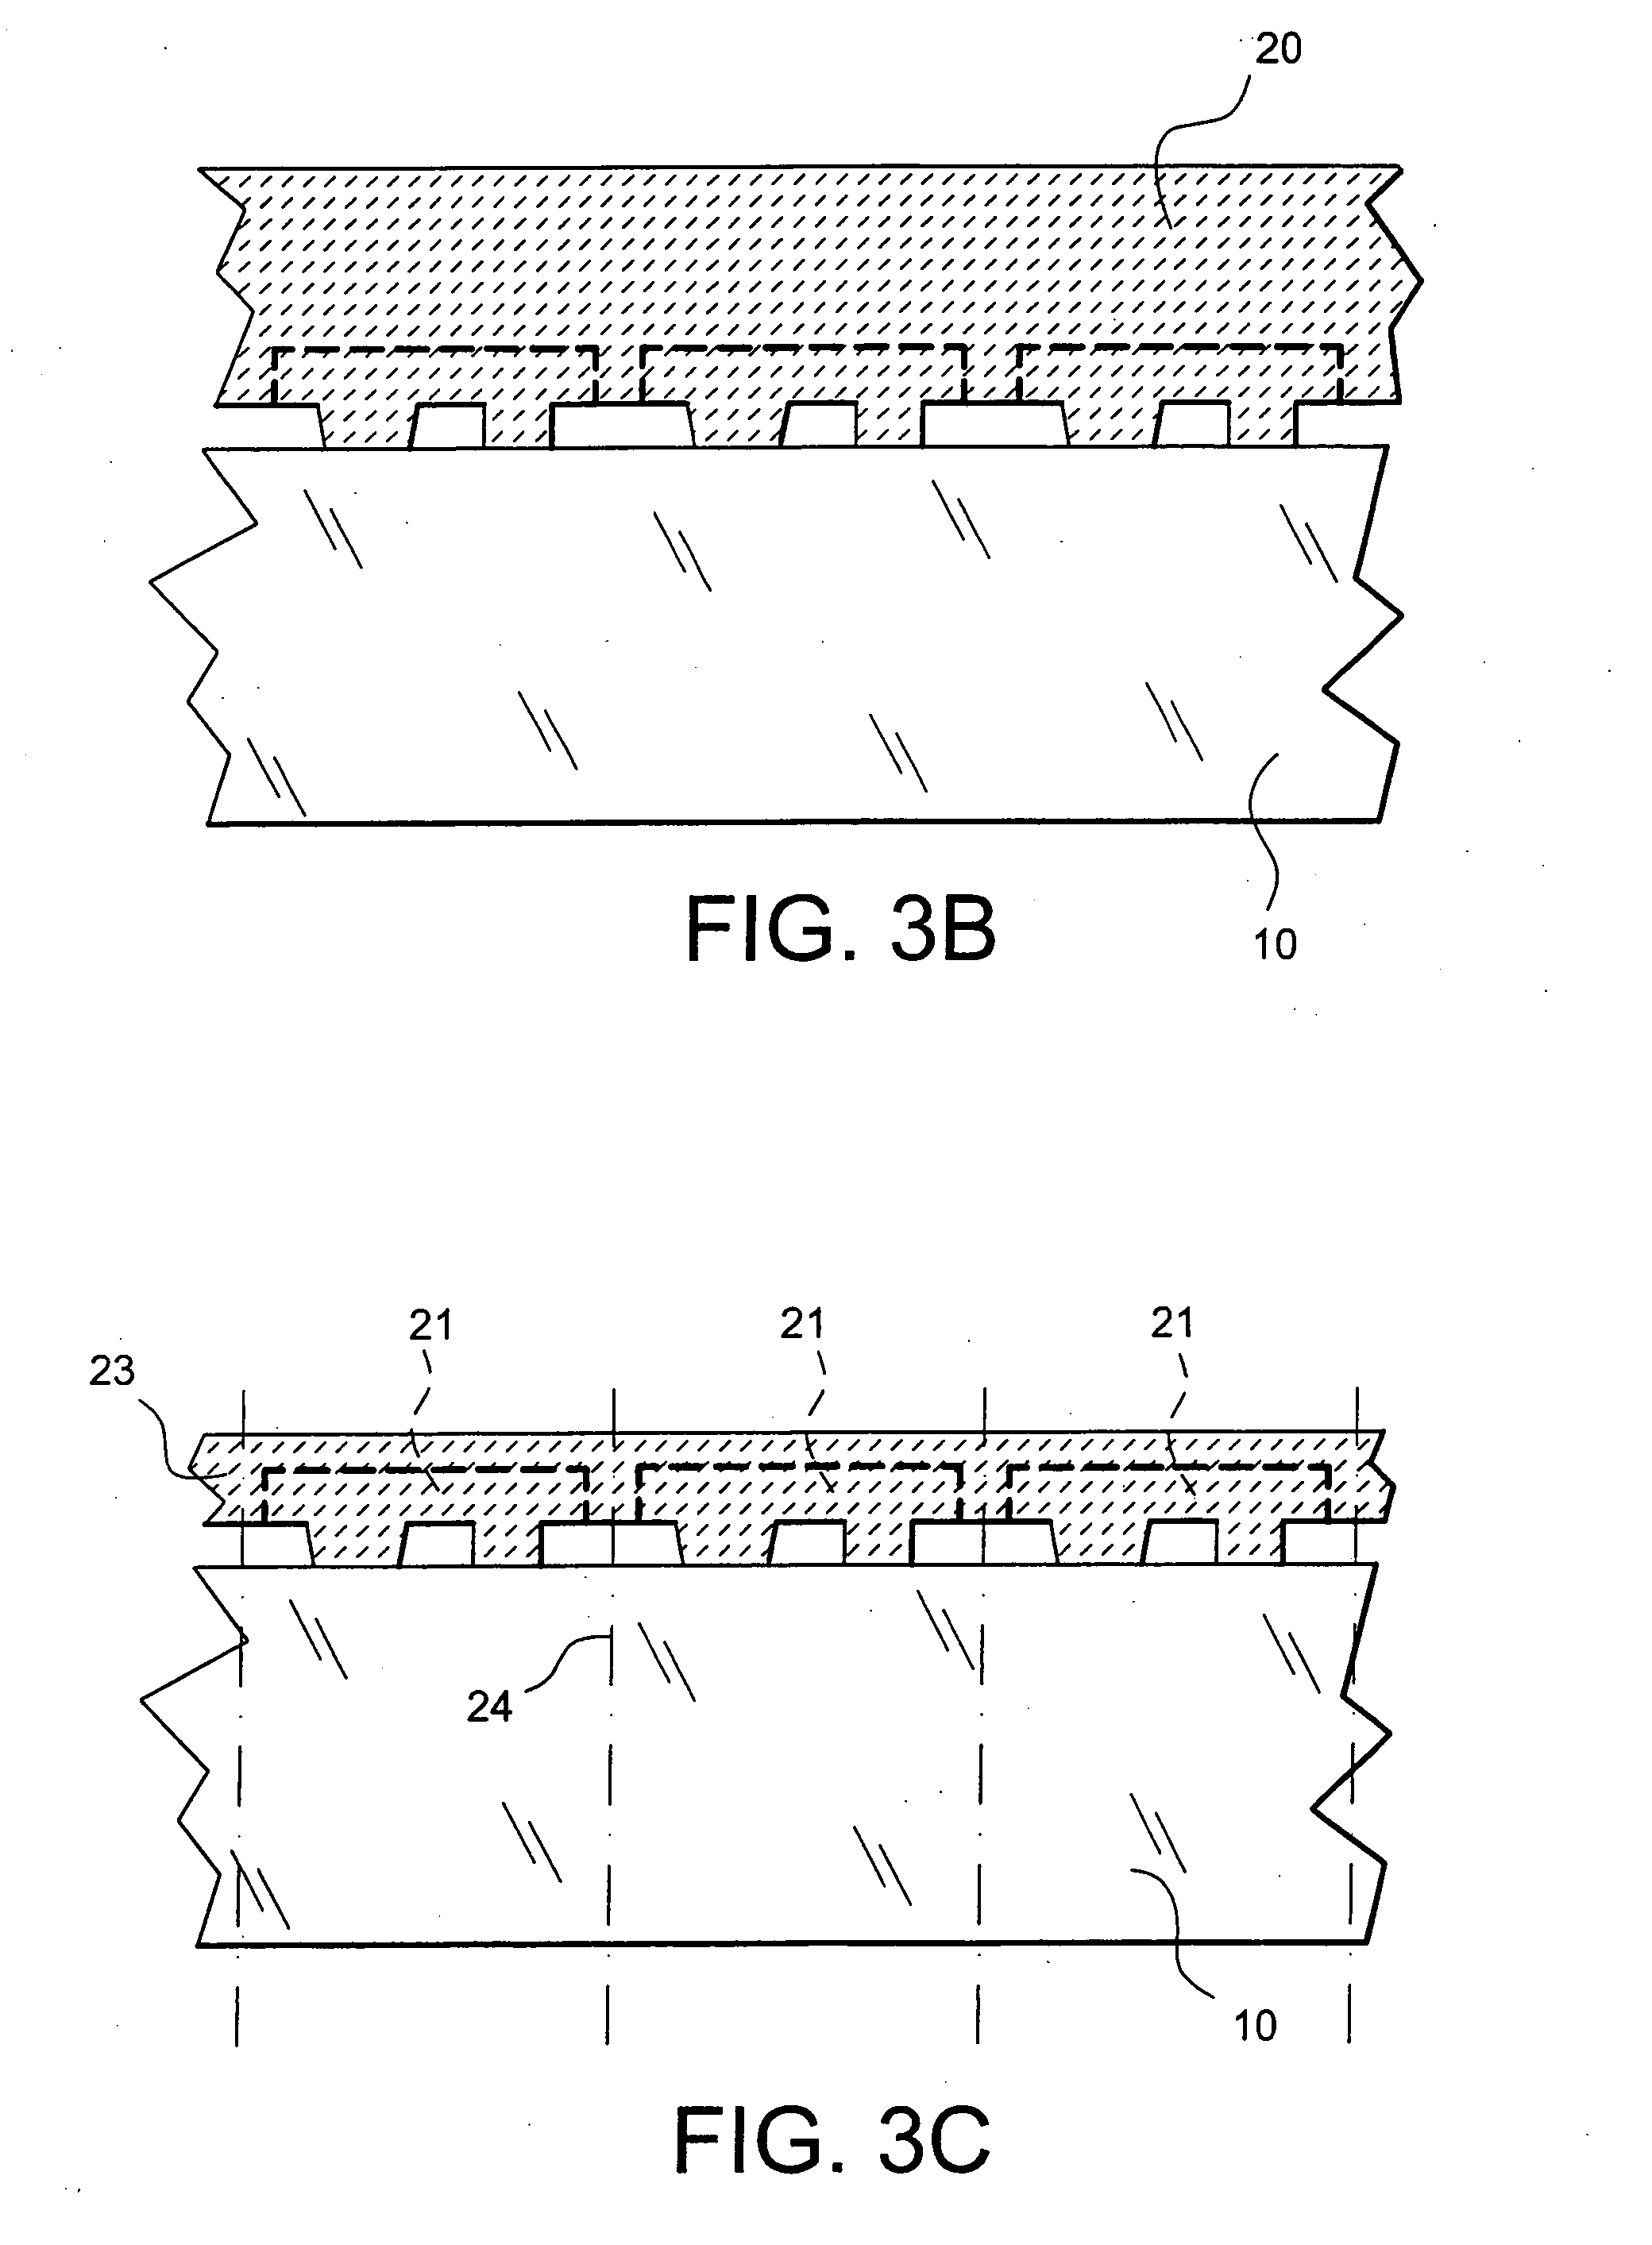 Method for handling semiconductor layers in such a way as to thin same